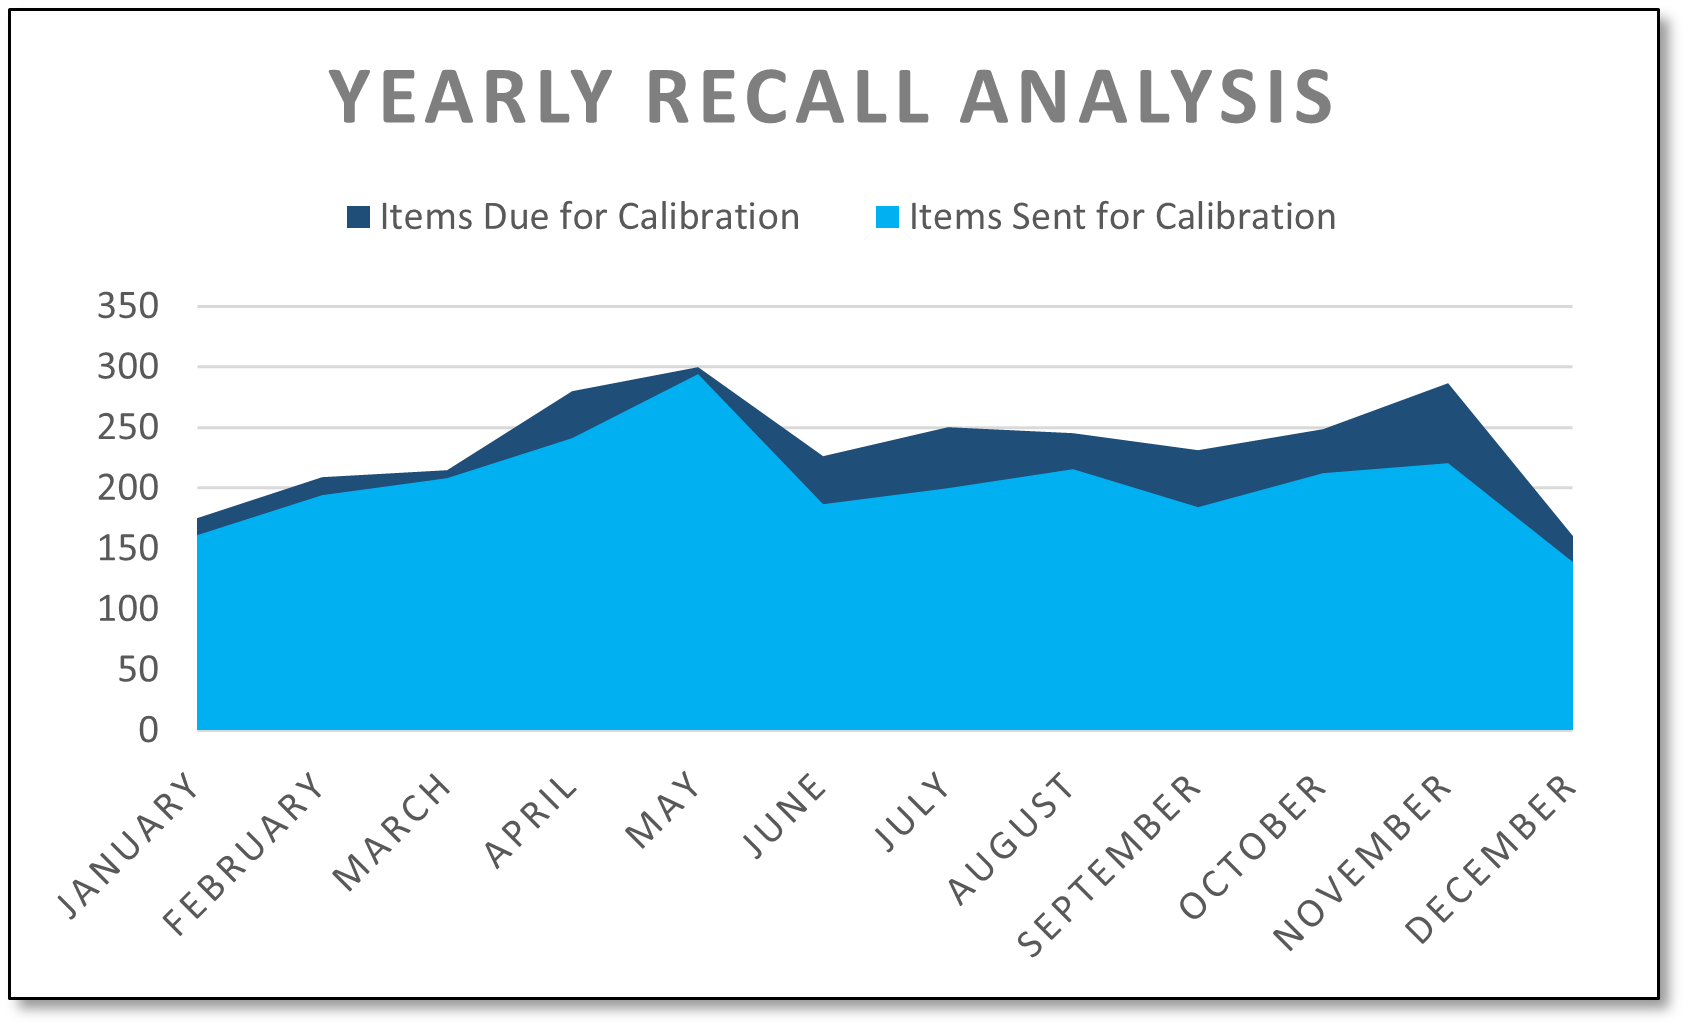 Graph of yearly recall analysis comparing items due for calibration and items sent for calibration